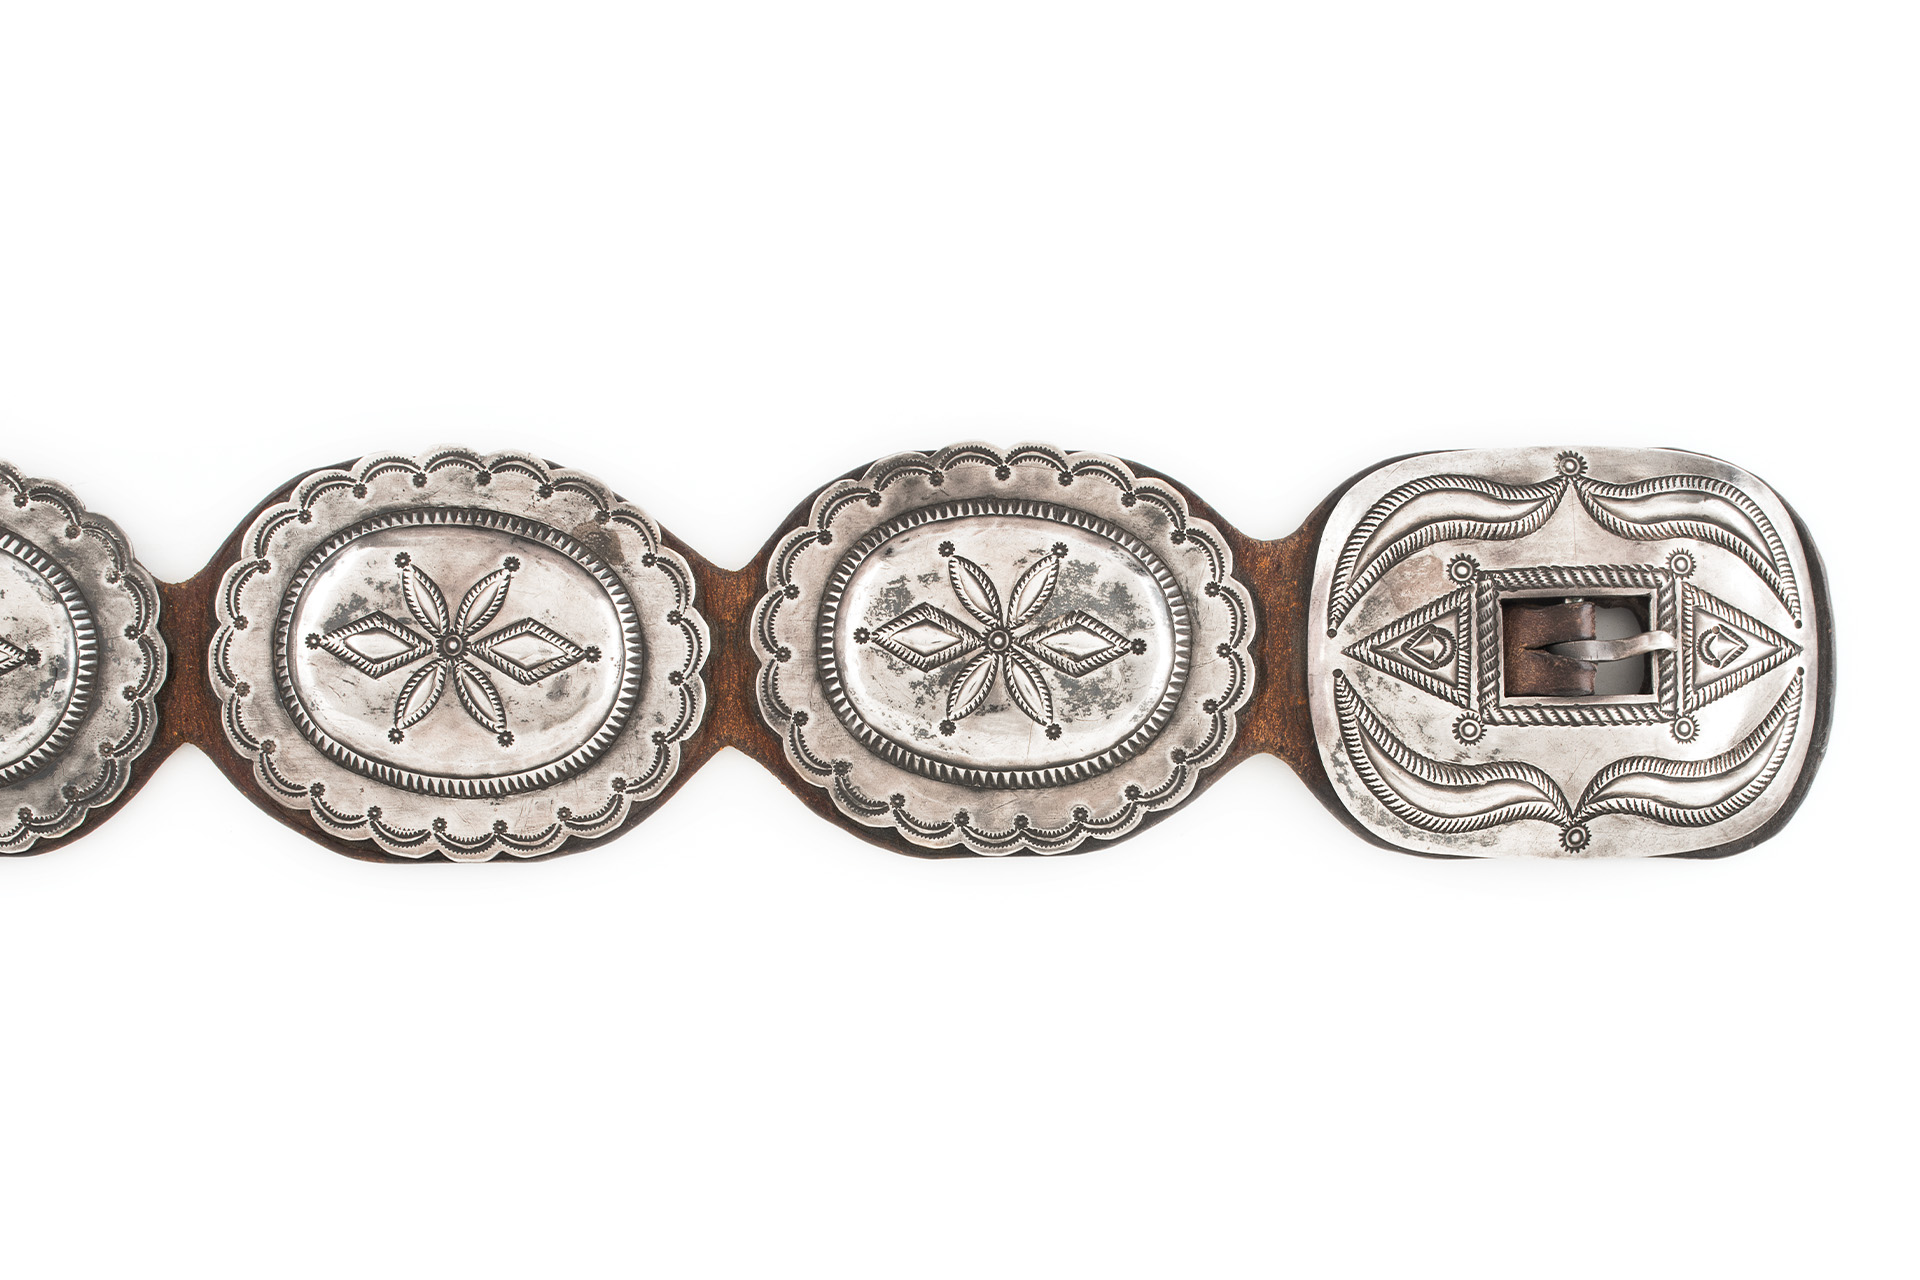 A silver belt with flower designs on it.